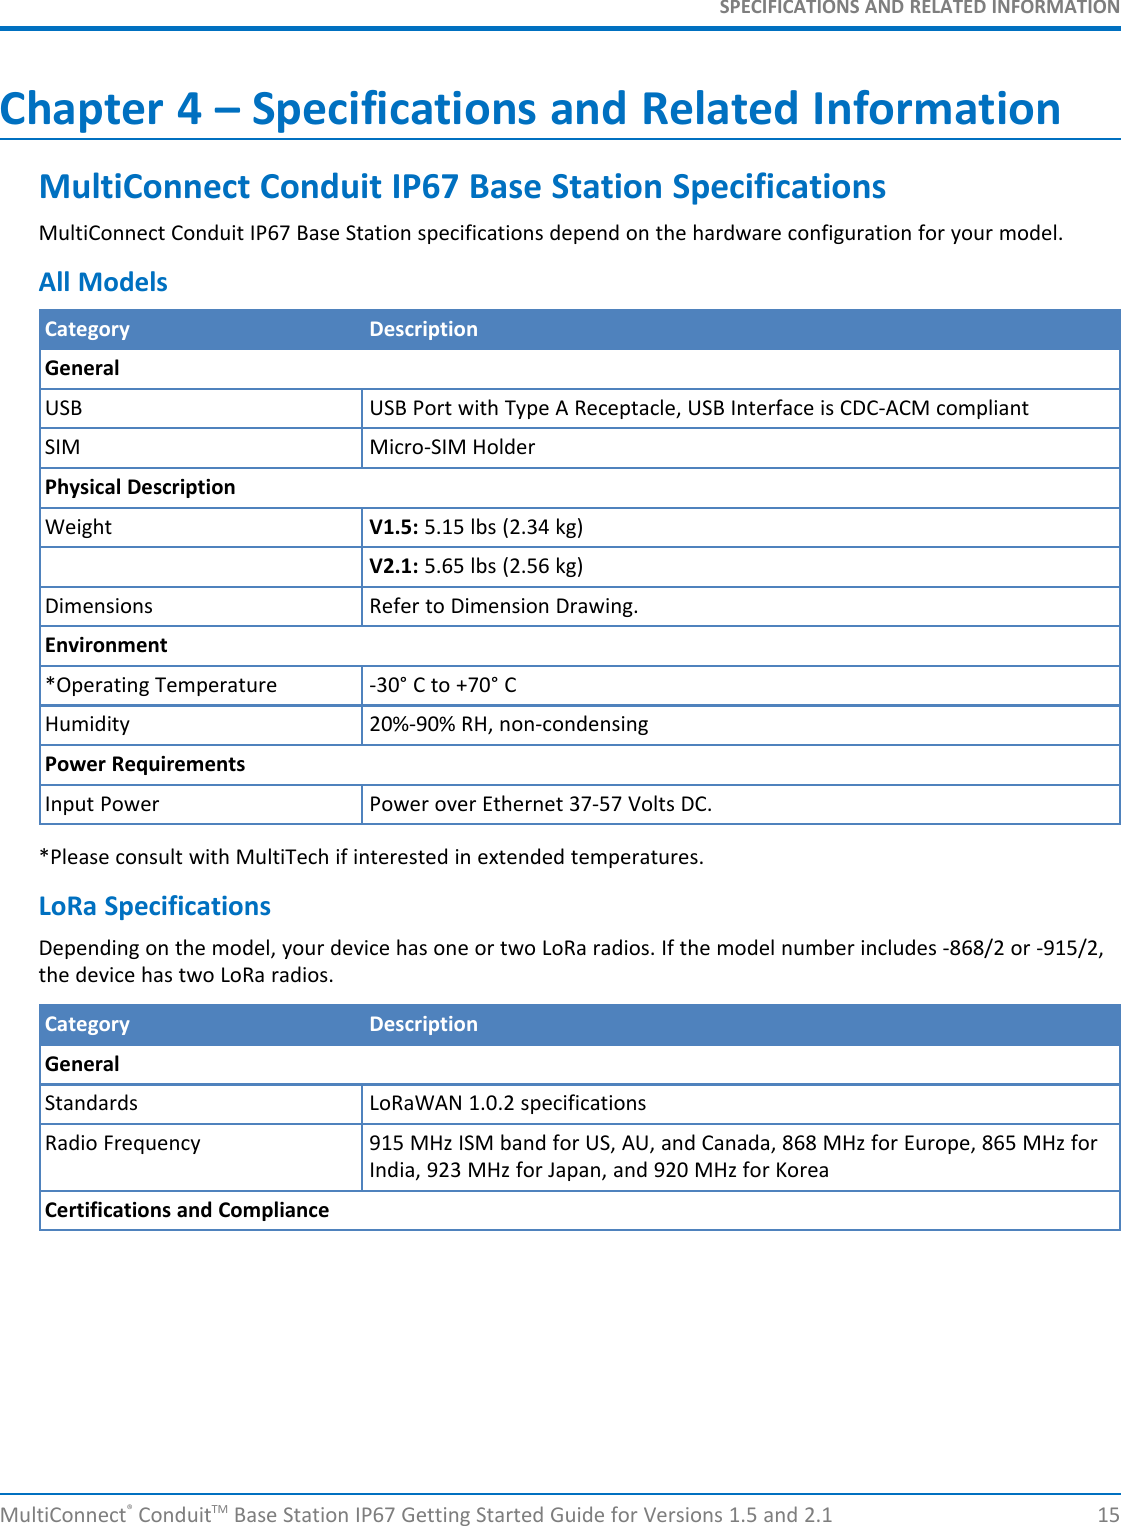 SPECIFICATIONS AND RELATED INFORMATIONMultiConnect®ConduitTM Base Station IP67 Getting Started Guide for Versions 1.5 and 2.1 15Chapter 4 – Specifications and Related InformationMultiConnect Conduit IP67 Base Station SpecificationsMultiConnect Conduit IP67 Base Station specifications depend on the hardware configuration for your model.All ModelsCategory DescriptionGeneralUSB USB Port with Type A Receptacle, USB Interface is CDC-ACM compliantSIM Micro-SIM HolderPhysical DescriptionWeight V1.5: 5.15 lbs (2.34 kg)V2.1: 5.65 lbs (2.56 kg)Dimensions Refer to Dimension Drawing.Environment*Operating Temperature -30° C to +70° CHumidity 20%-90% RH, non-condensingPower RequirementsInput Power Power over Ethernet 37-57 Volts DC.*Please consult with MultiTech if interested in extended temperatures.LoRa SpecificationsDepending on the model, your device has one or two LoRa radios. If the model number includes -868/2 or -915/2,the device has two LoRa radios.Category DescriptionGeneralStandards LoRaWAN 1.0.2 specificationsRadio Frequency 915 MHz ISM band for US, AU, and Canada, 868 MHz for Europe, 865 MHz forIndia, 923 MHz for Japan, and 920 MHz for KoreaCertifications and Compliance